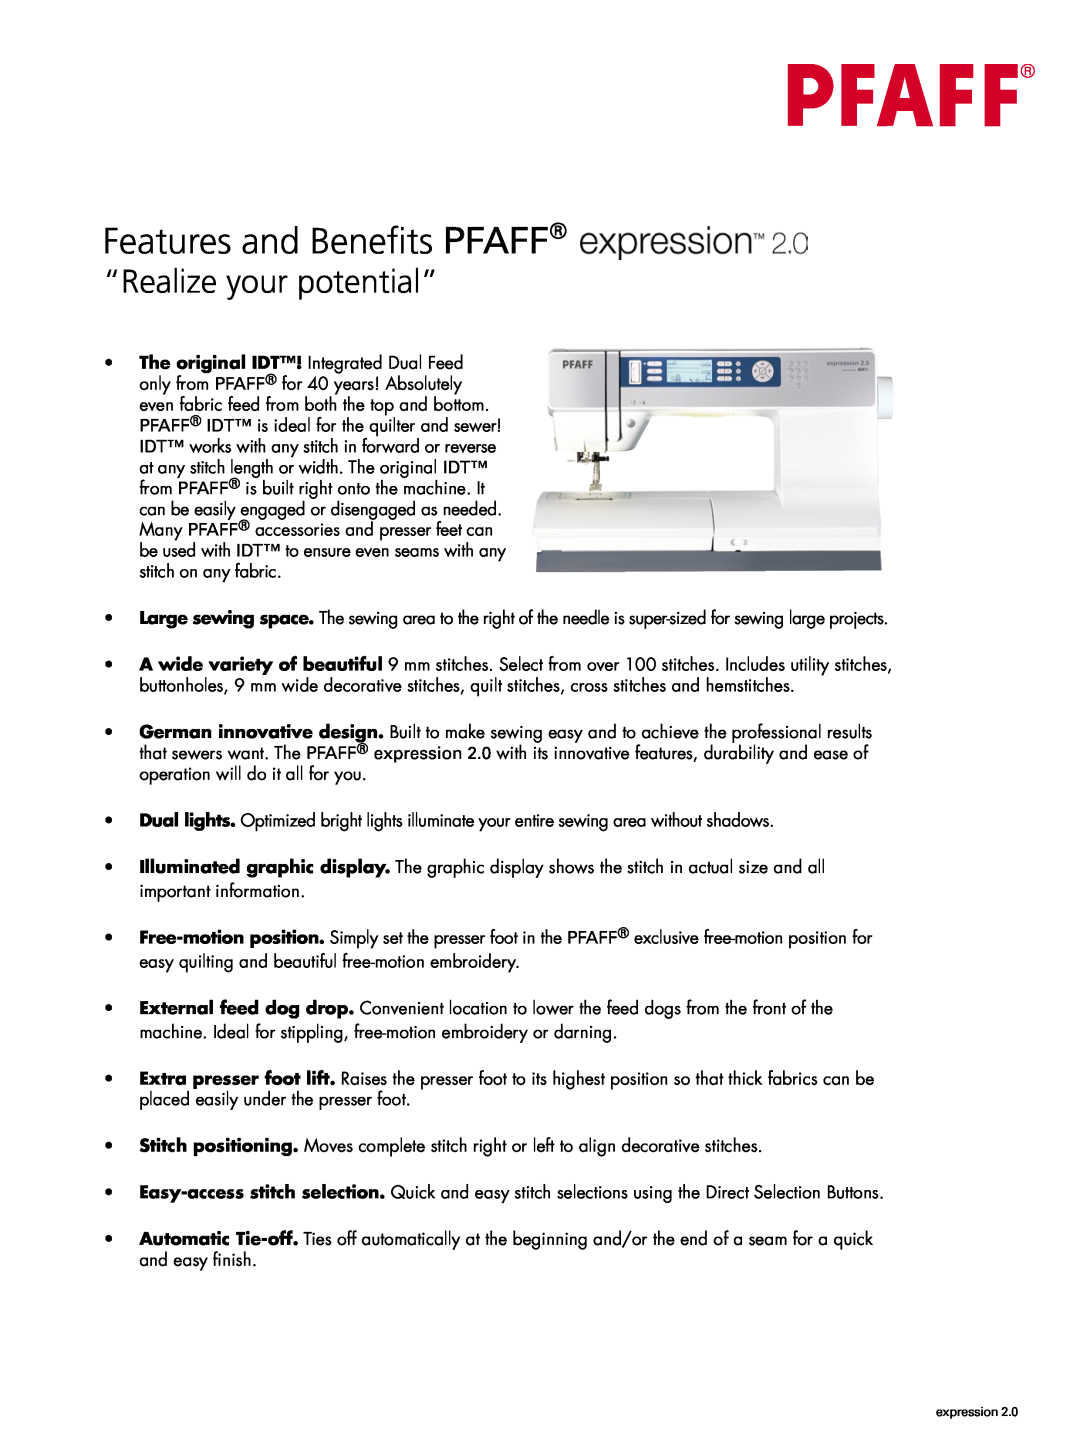 Pfaff expression 2.0 manual Features and Benefits PFAFF, “Realize your potential” 